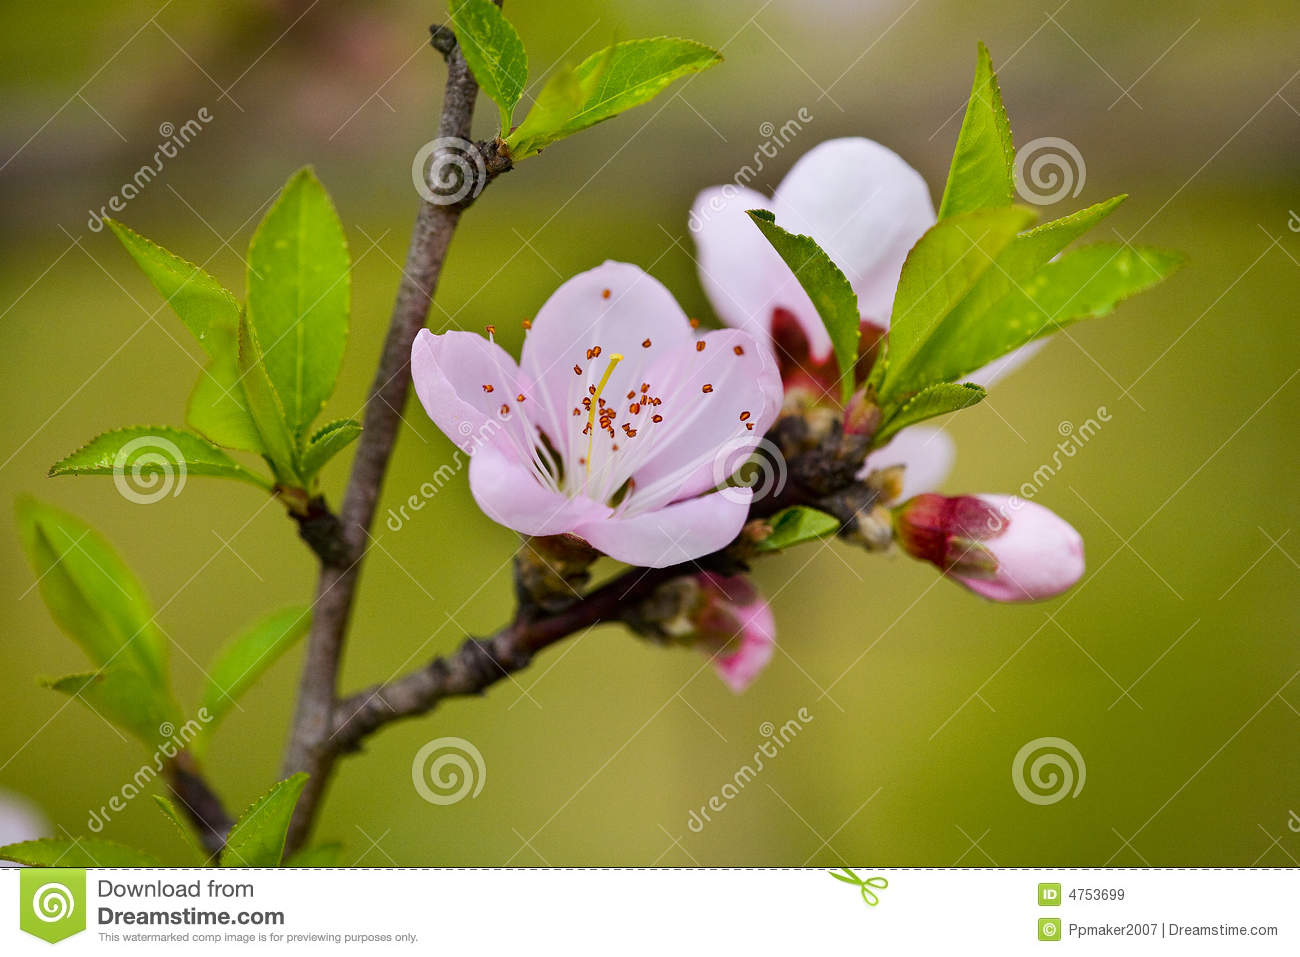 Peach Blossom Royalty Free Stock Images   Image  4753699